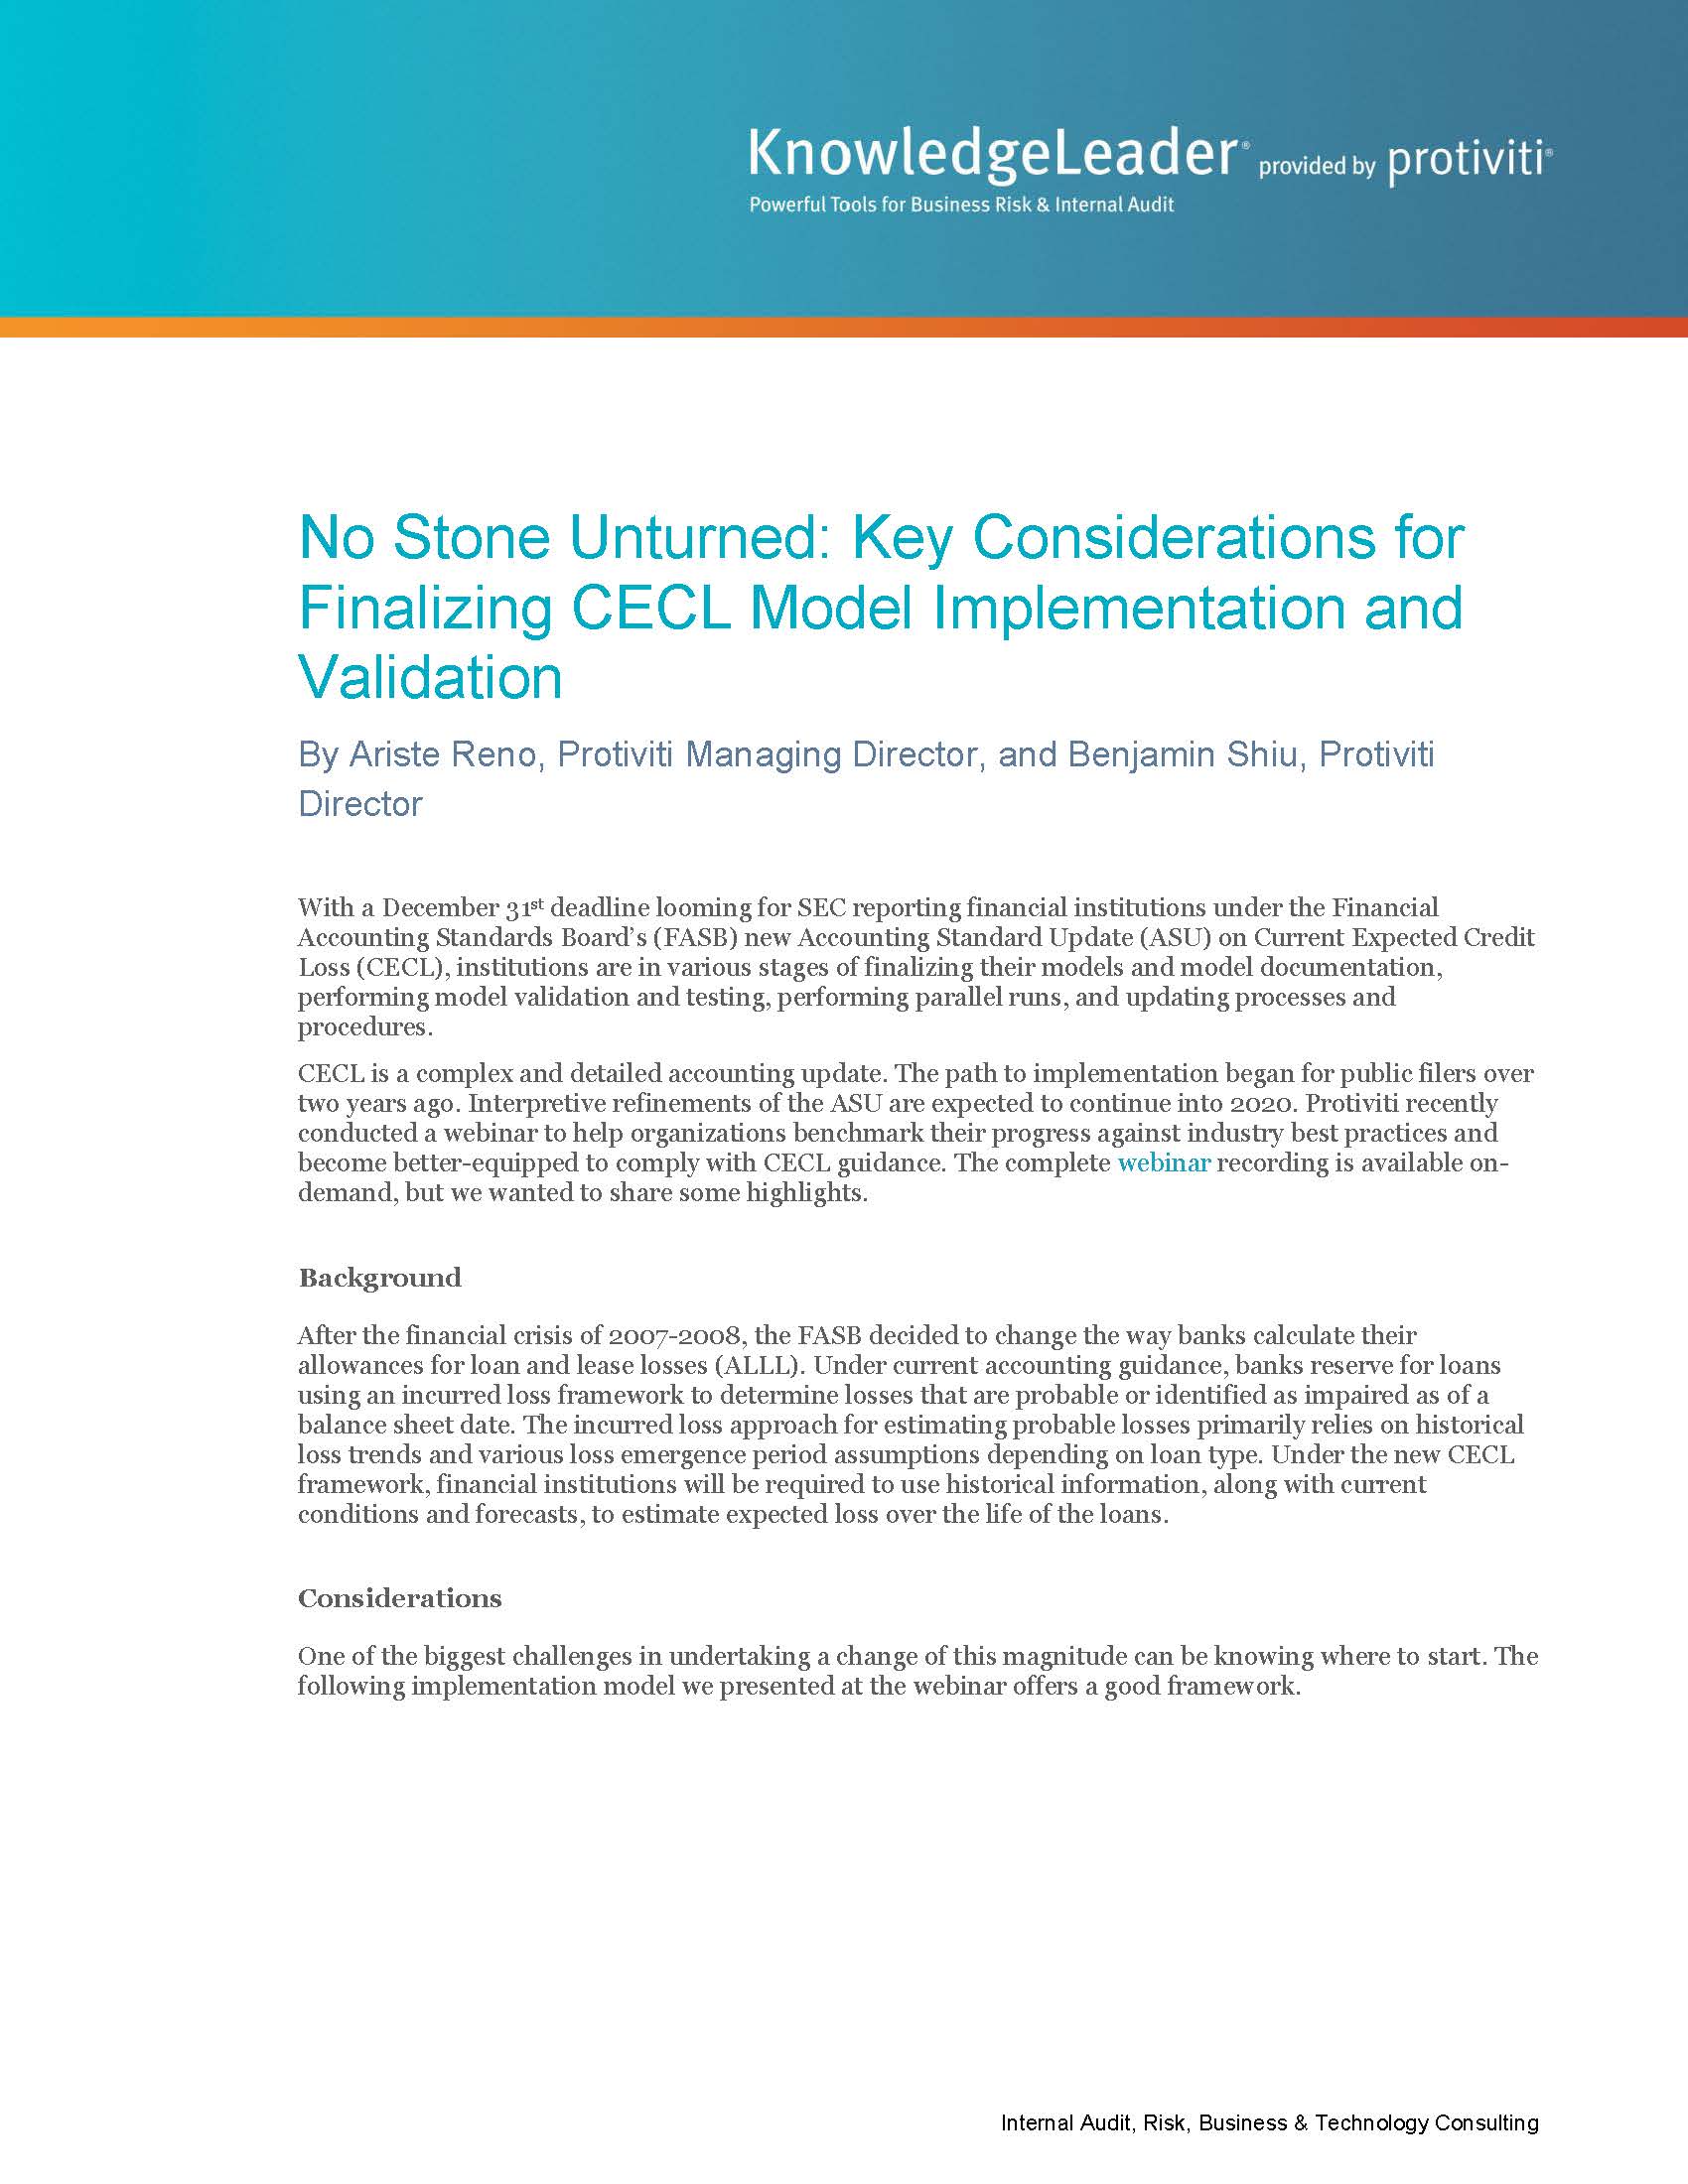 Screenshot of the first page of No Stone Unturned Key Considerations for Finalizing CECL Model Implementation and Validation